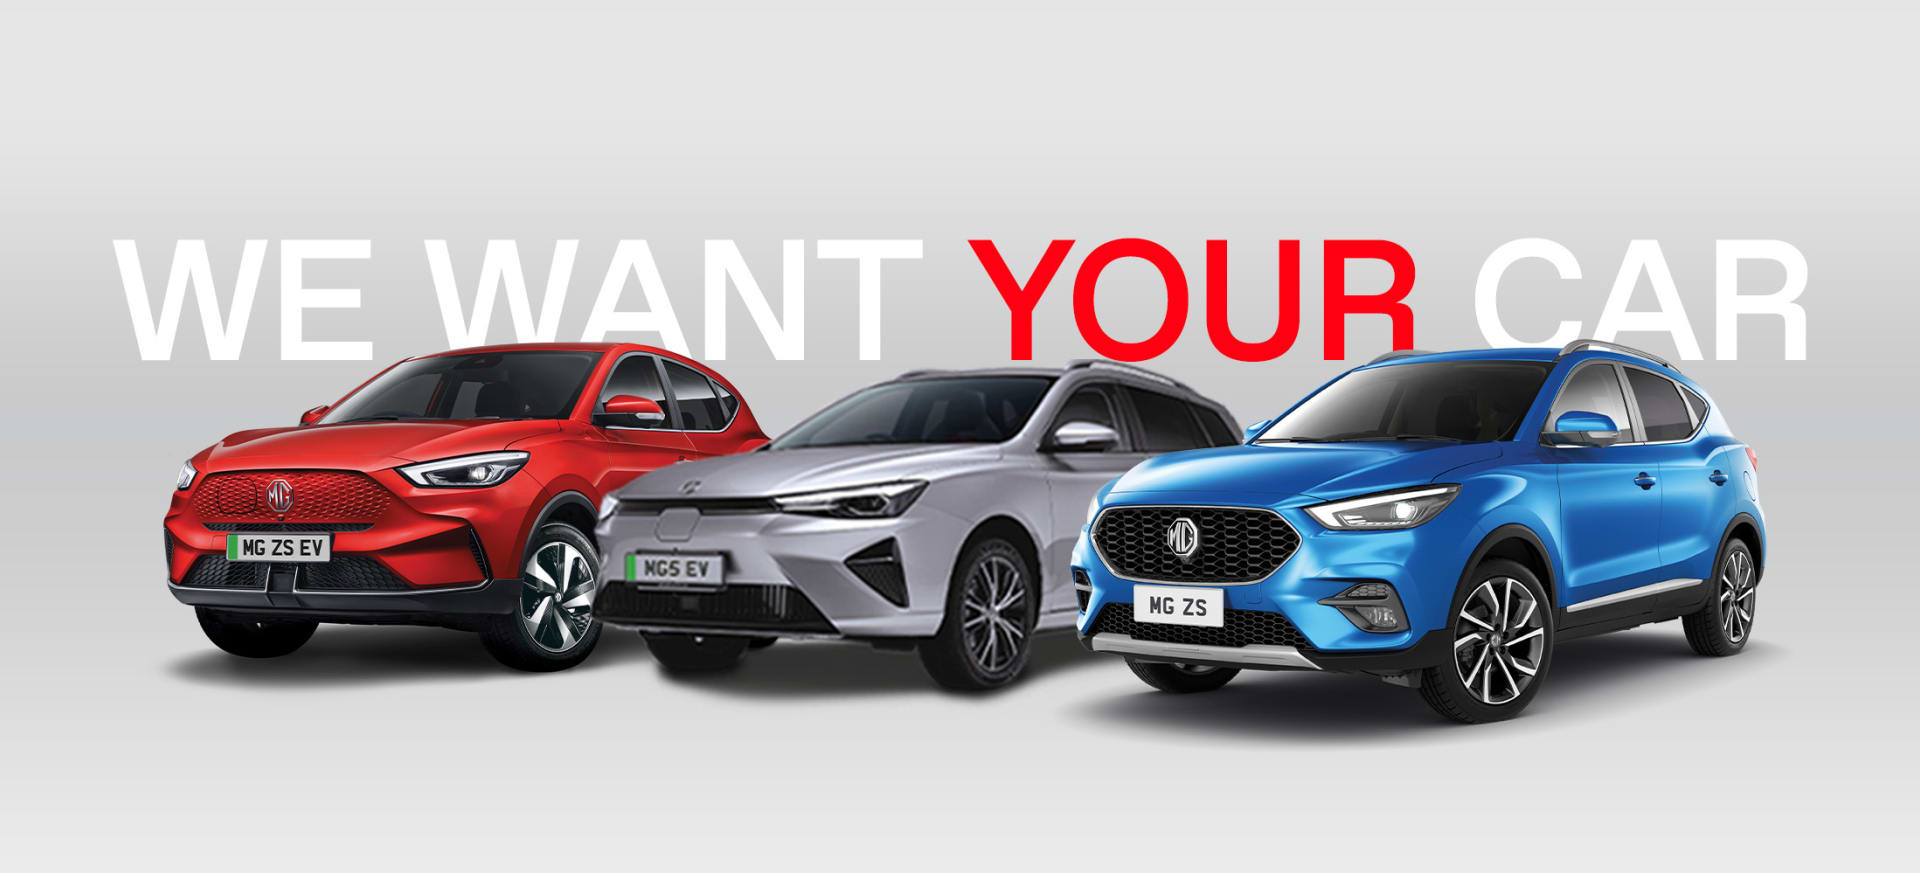 MG - We Want Your Car 